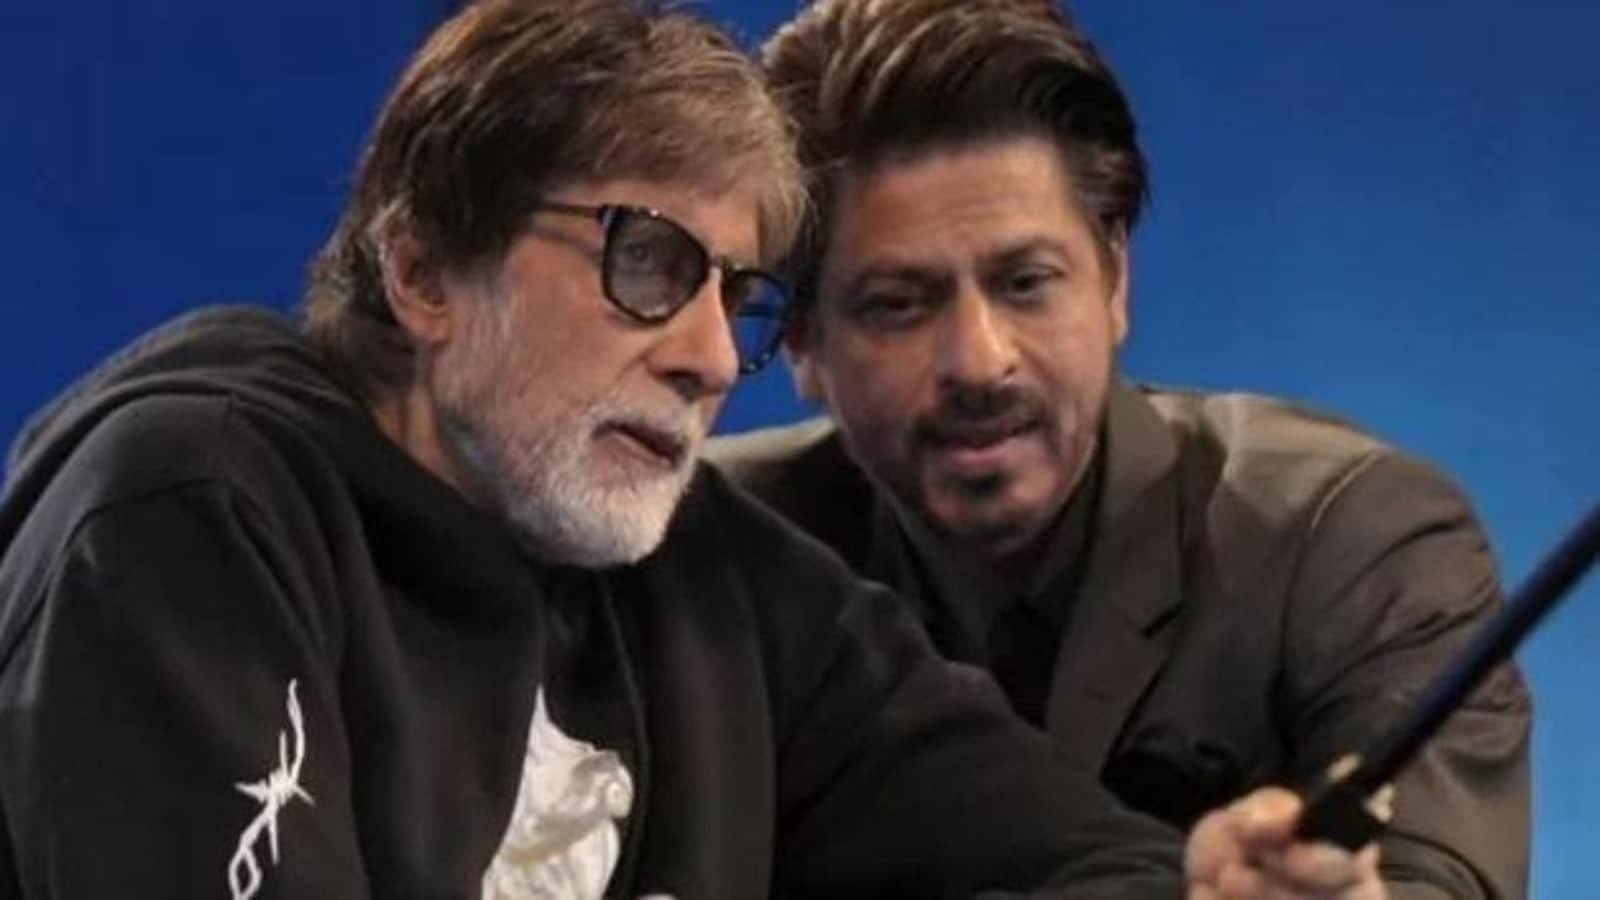 Shah Rukh Khan's Birthday Post For Amitabh Bachchan Is Everything:  Breathing The Same Air As You